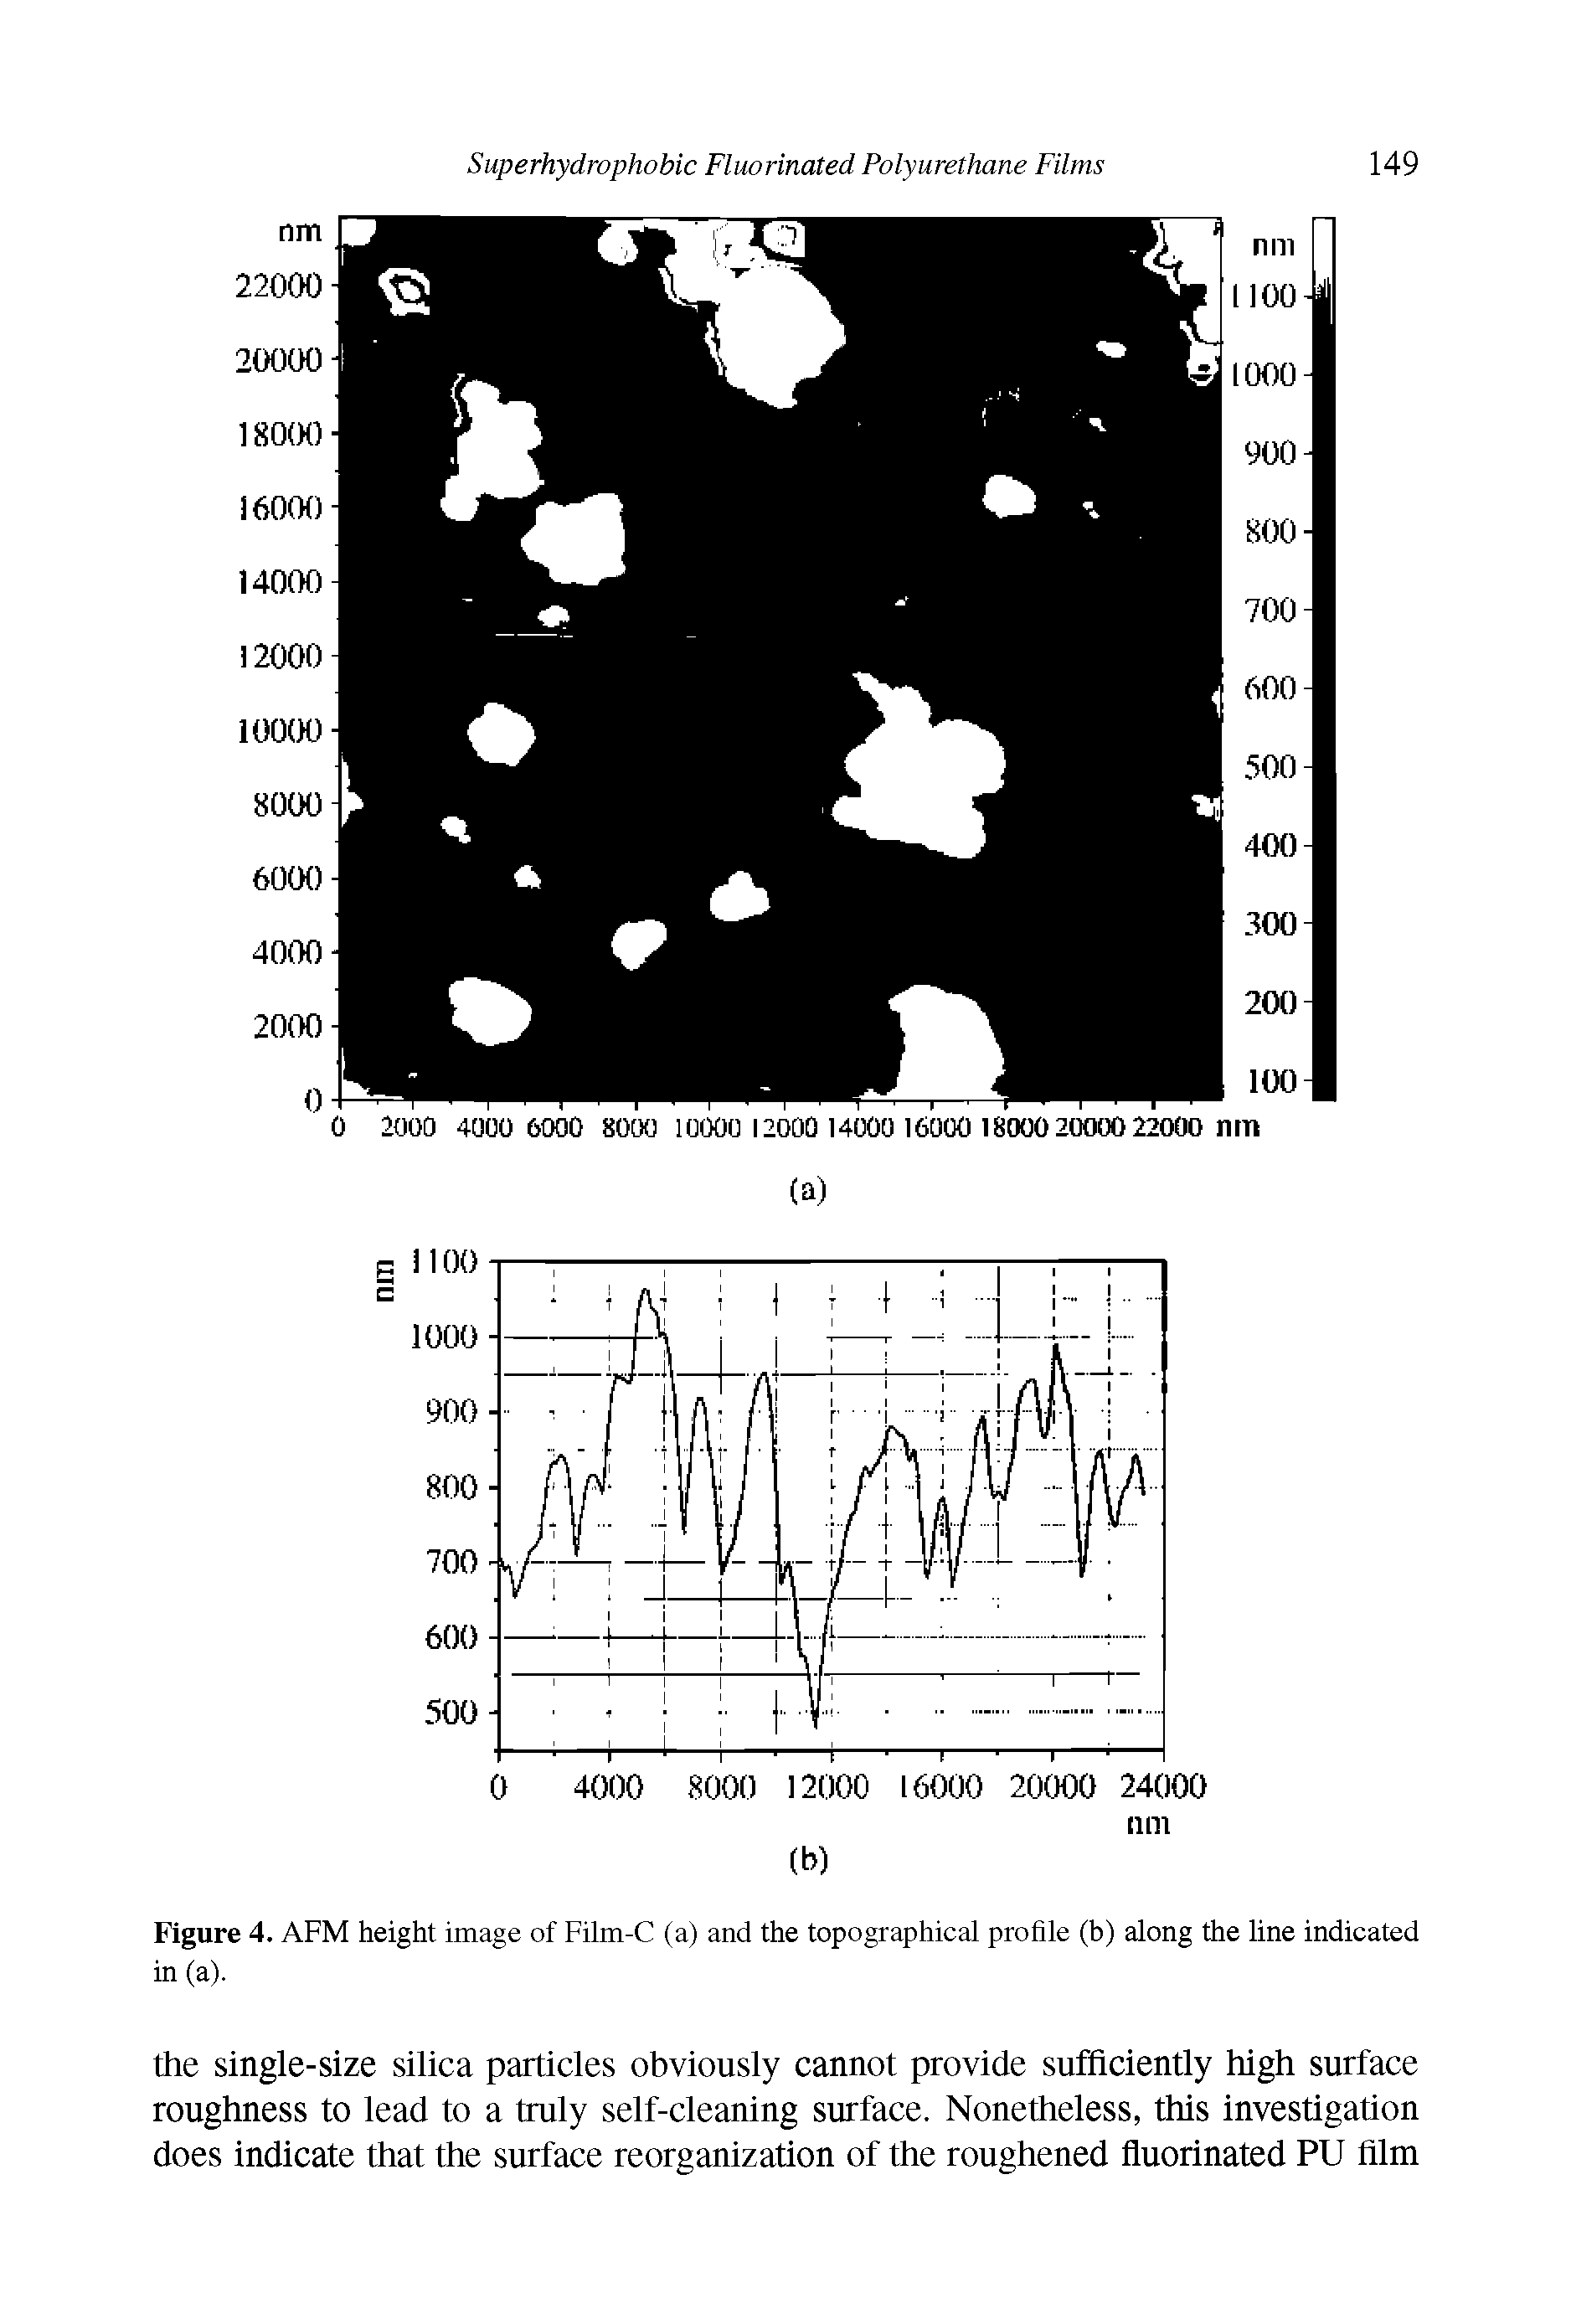 Figure 4. AFM height image of Film-C (a) and the topographical profile (b) along the fine indicated in (a).